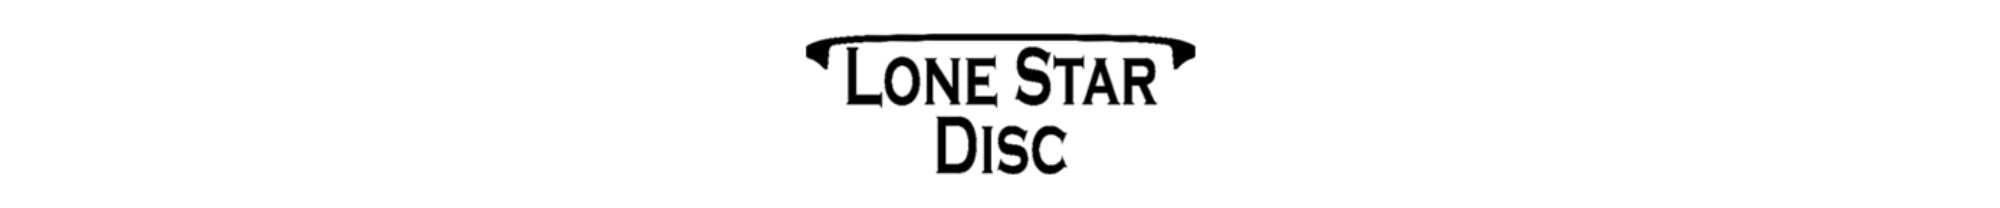 Lone Star Discs - Select to View Color Options